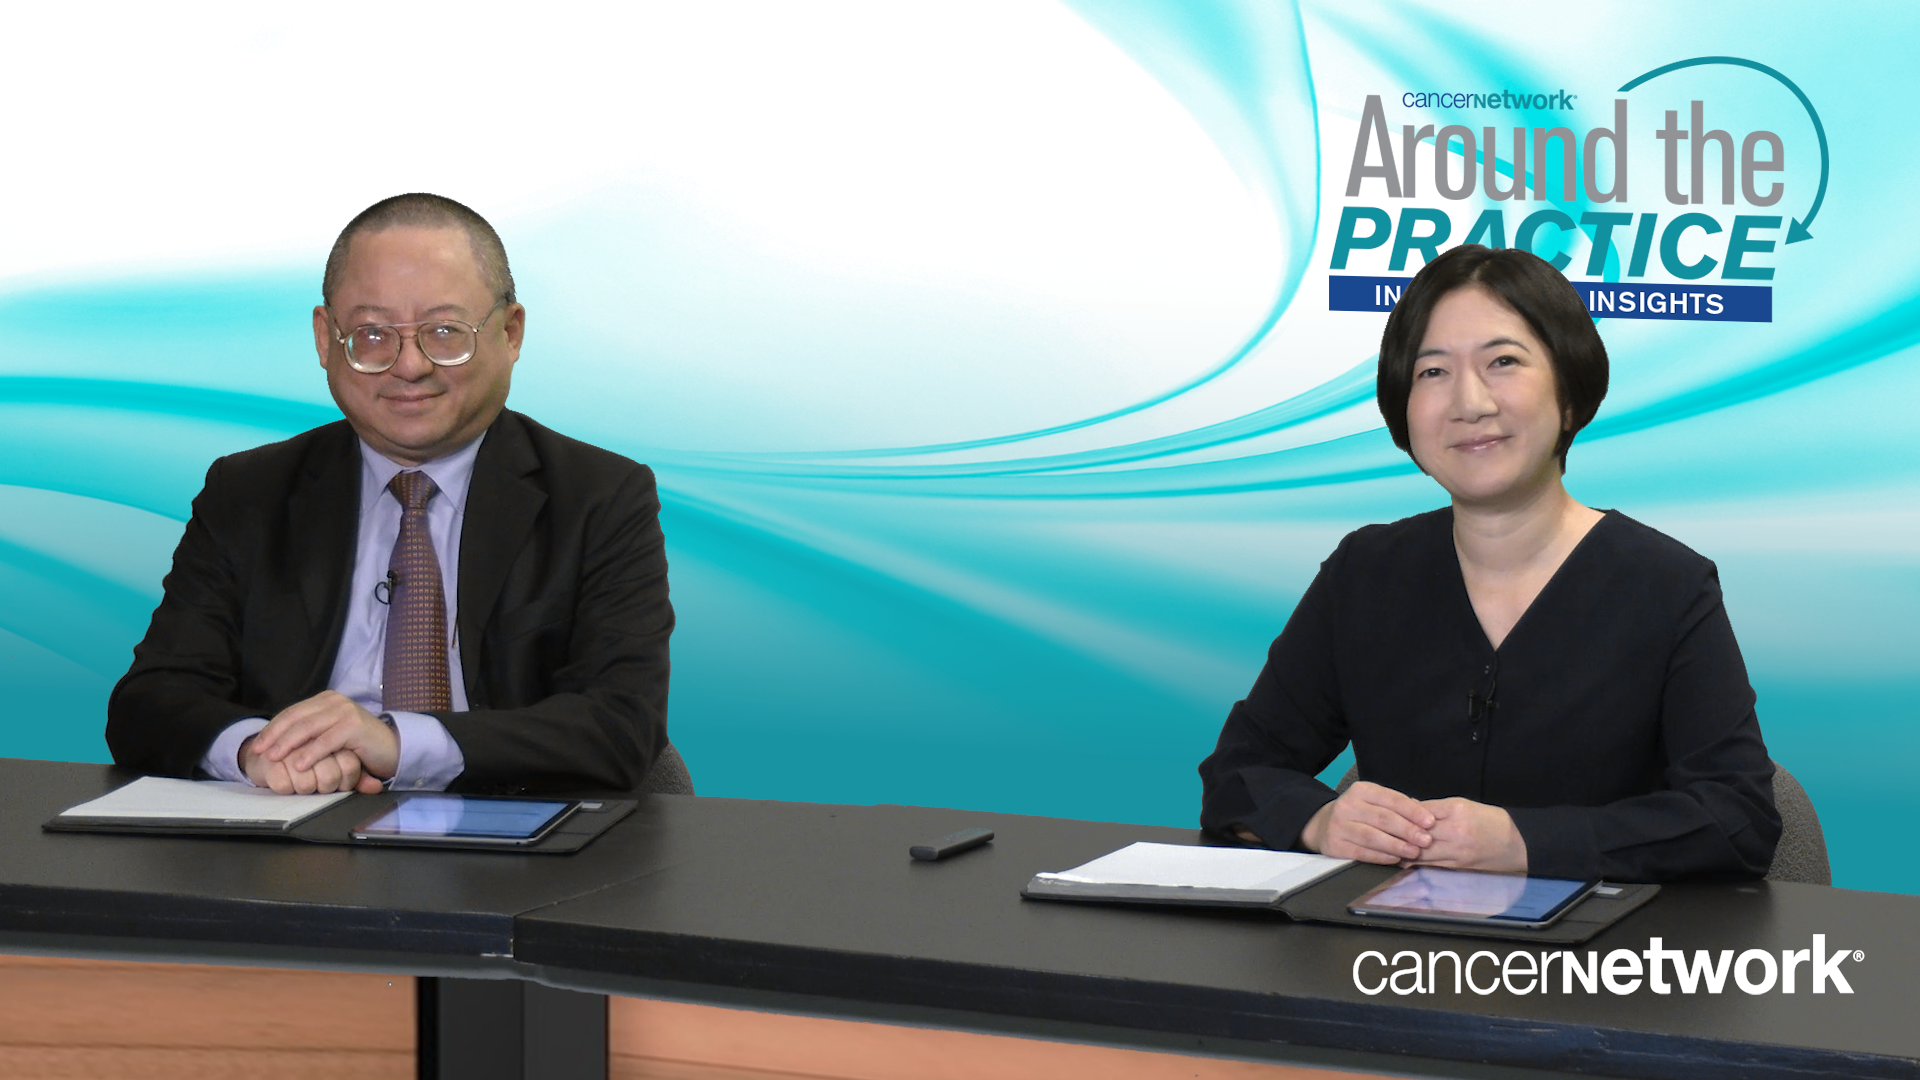 Approaches to Biomarker Testing in Non-Small Cell Lung Cancer (NSCLC)